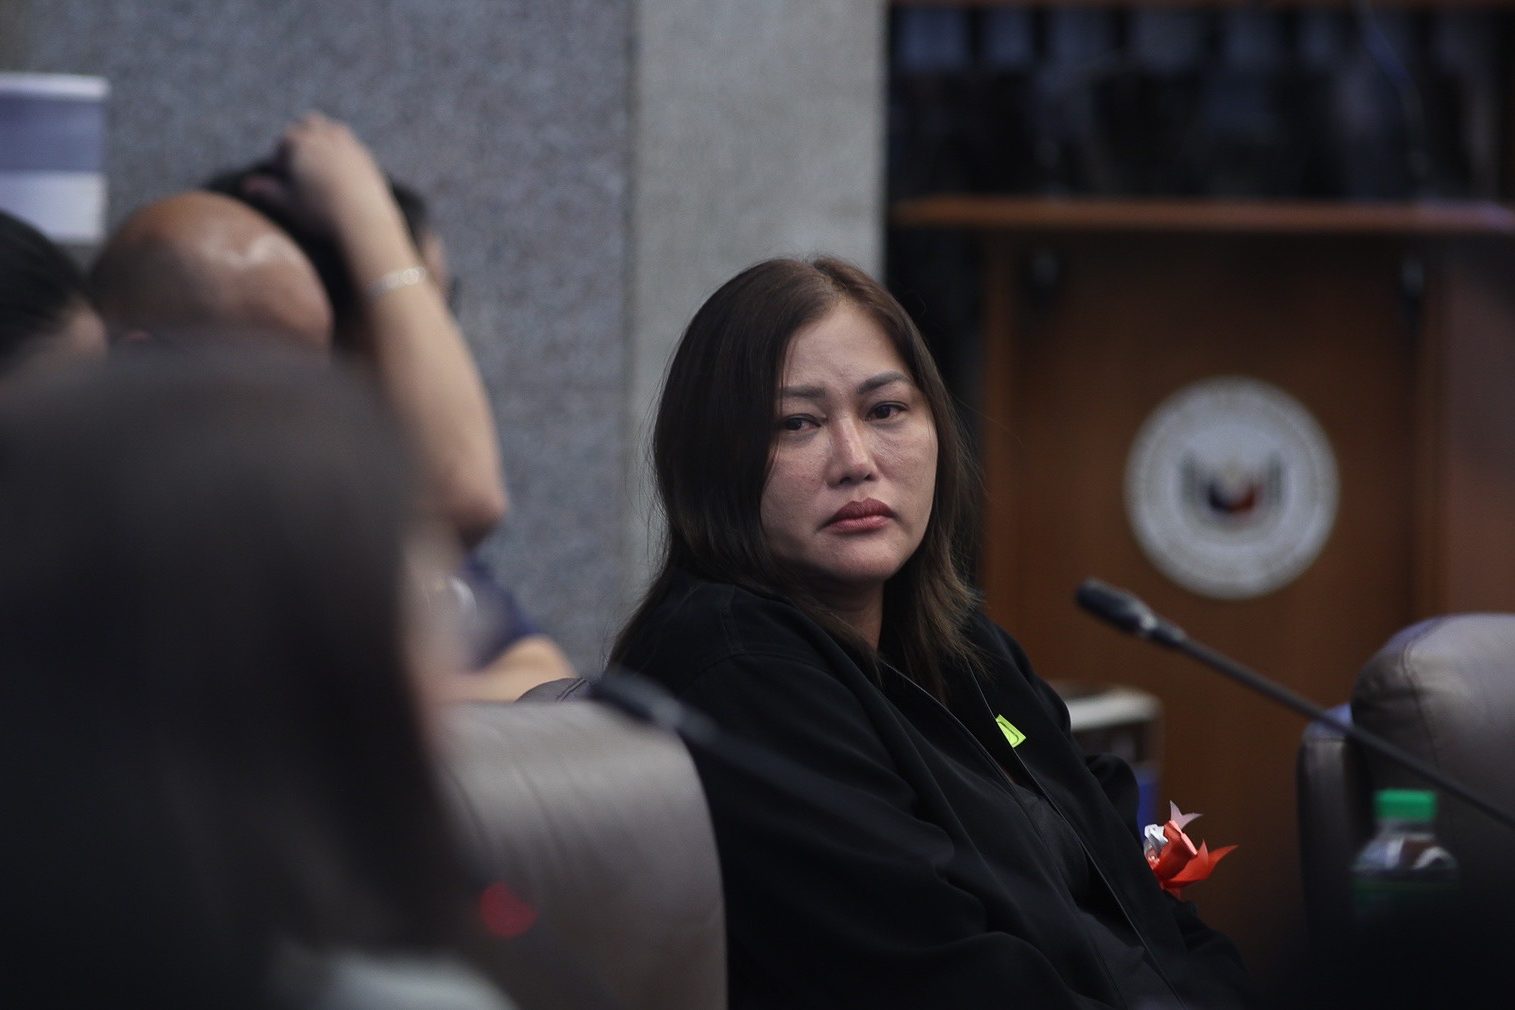 A year after Pamplona massacre, Janice Degamo says ‘justice is coming’